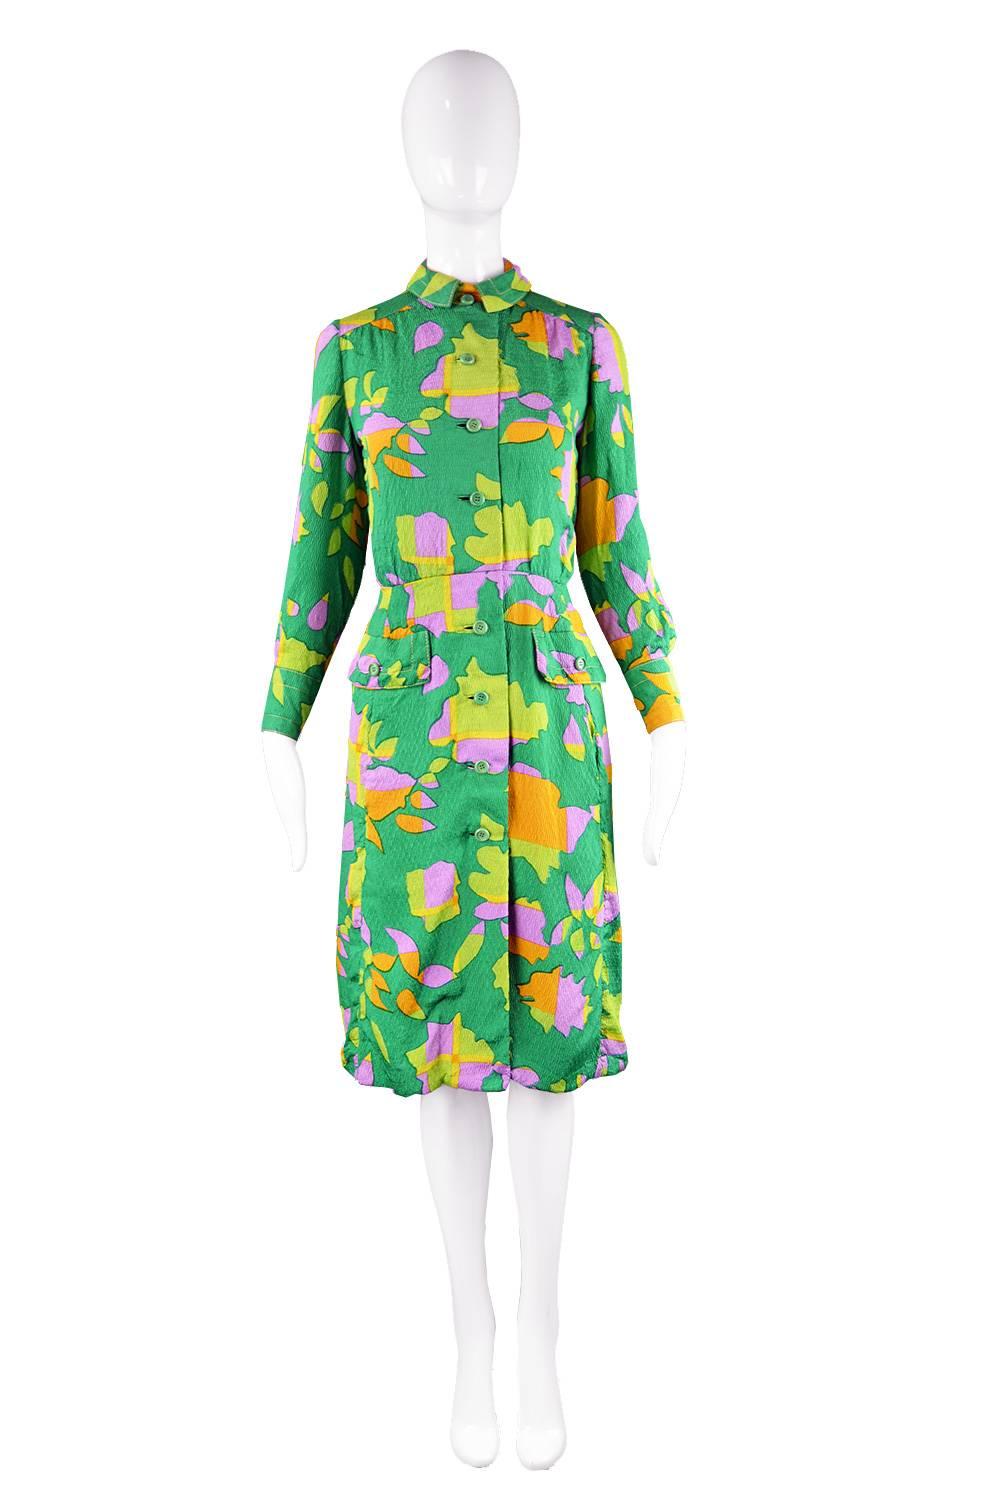 A gorgeous vintage dress by legendary American designer, James Galanos for Amelia Gray of Beverly Hills. In a fabulous green textured silk with a vibrant, tropical/ abstract print throughout. With topstitching highlighting the collar and cuffs and